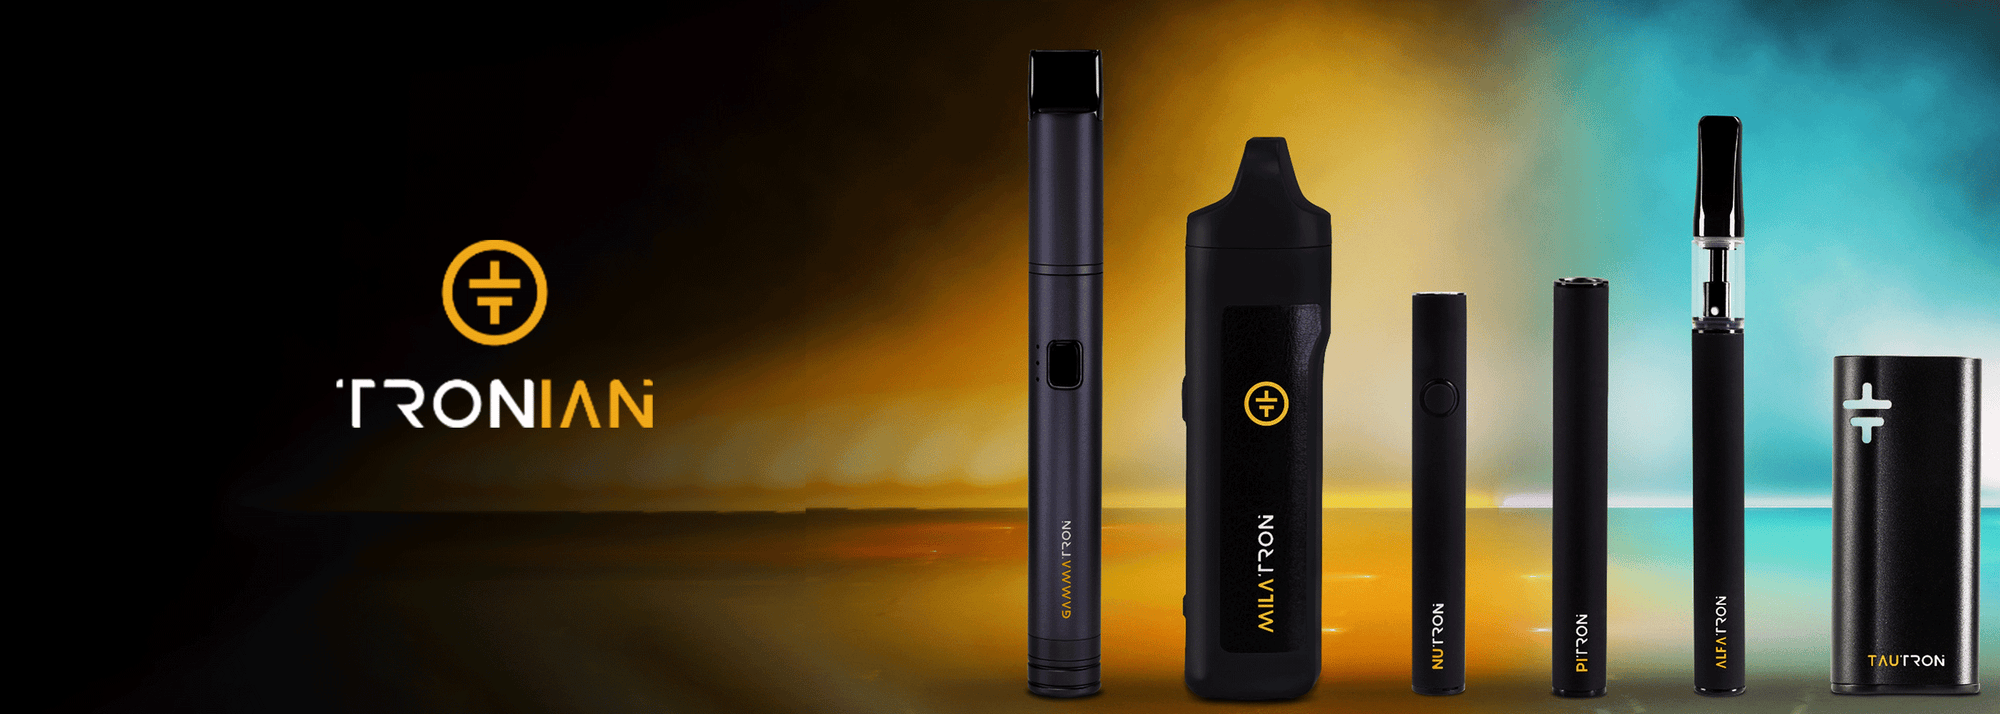 Buy Tronian Dry Herb Vaporizers and 510 Threaded Batteries - Wick and Wire Co Melbourne Vape Shop, Victoria Australia